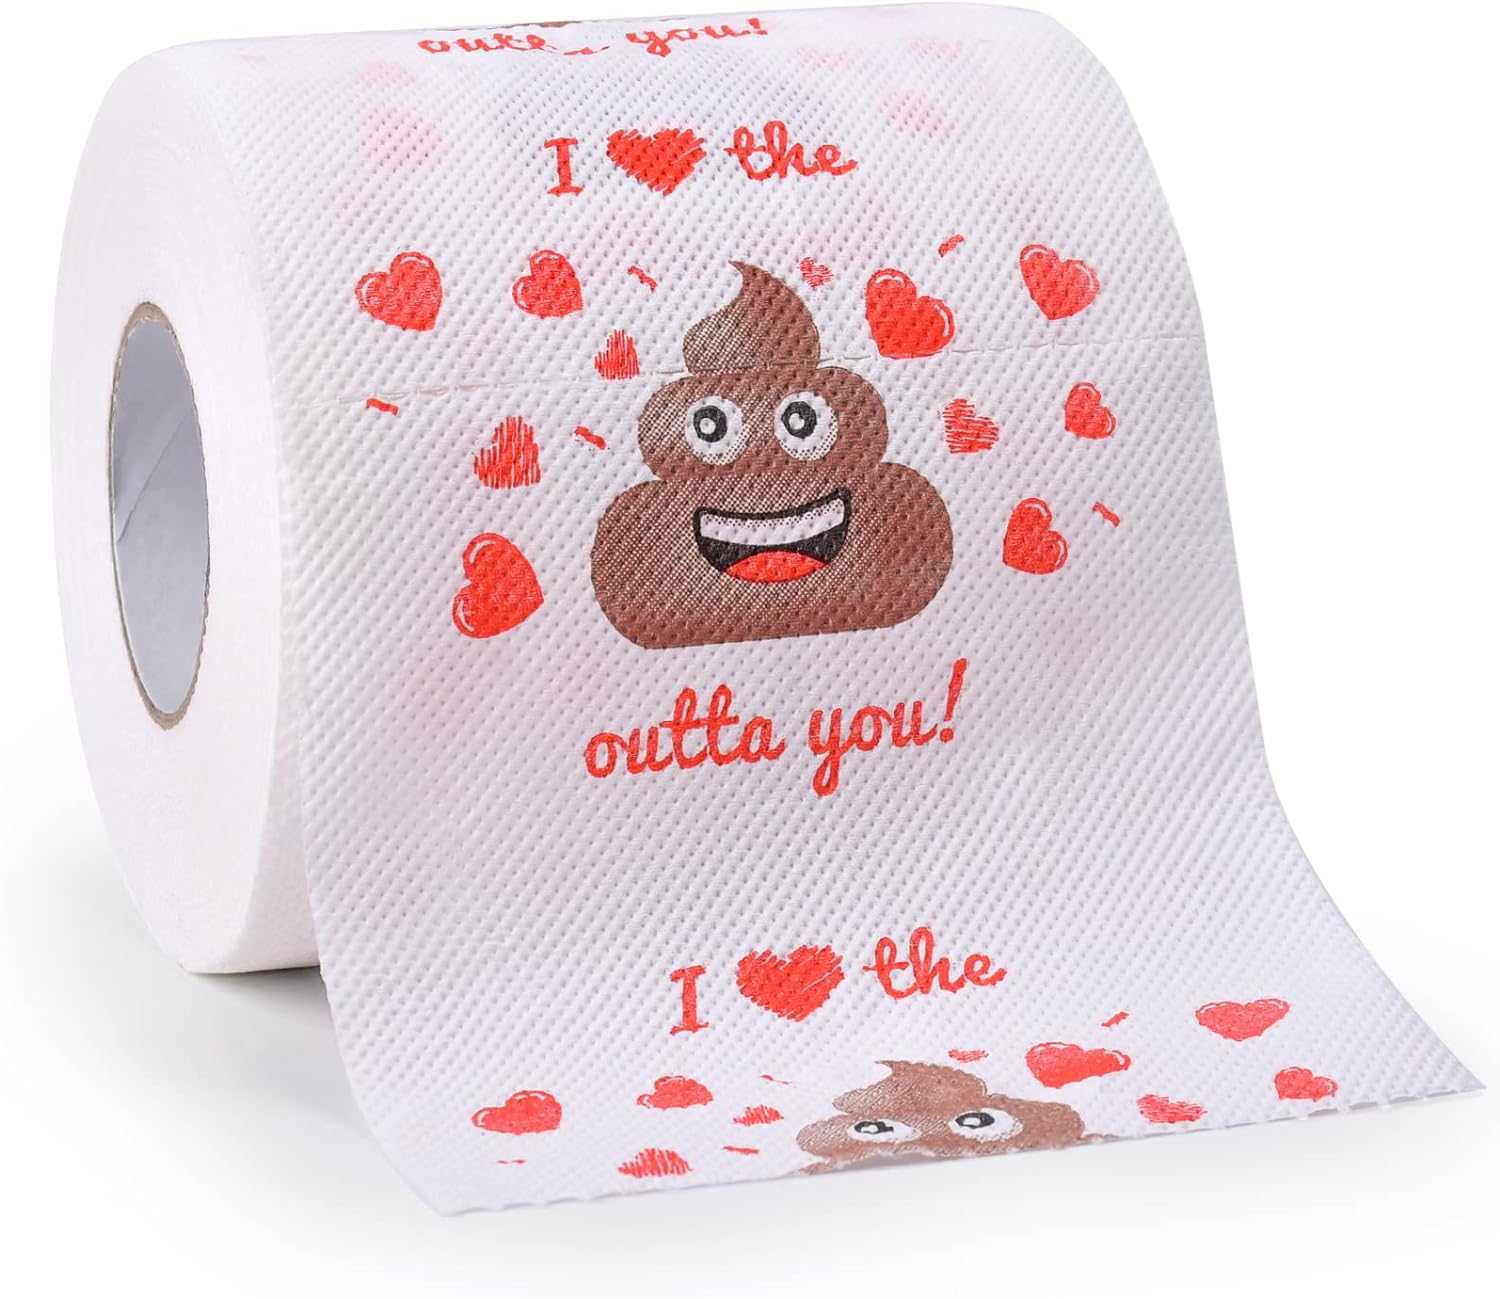 Rolling in Laughter: Valentine's Day Novelty Toilet Paper – A Hilarious Gift for Him